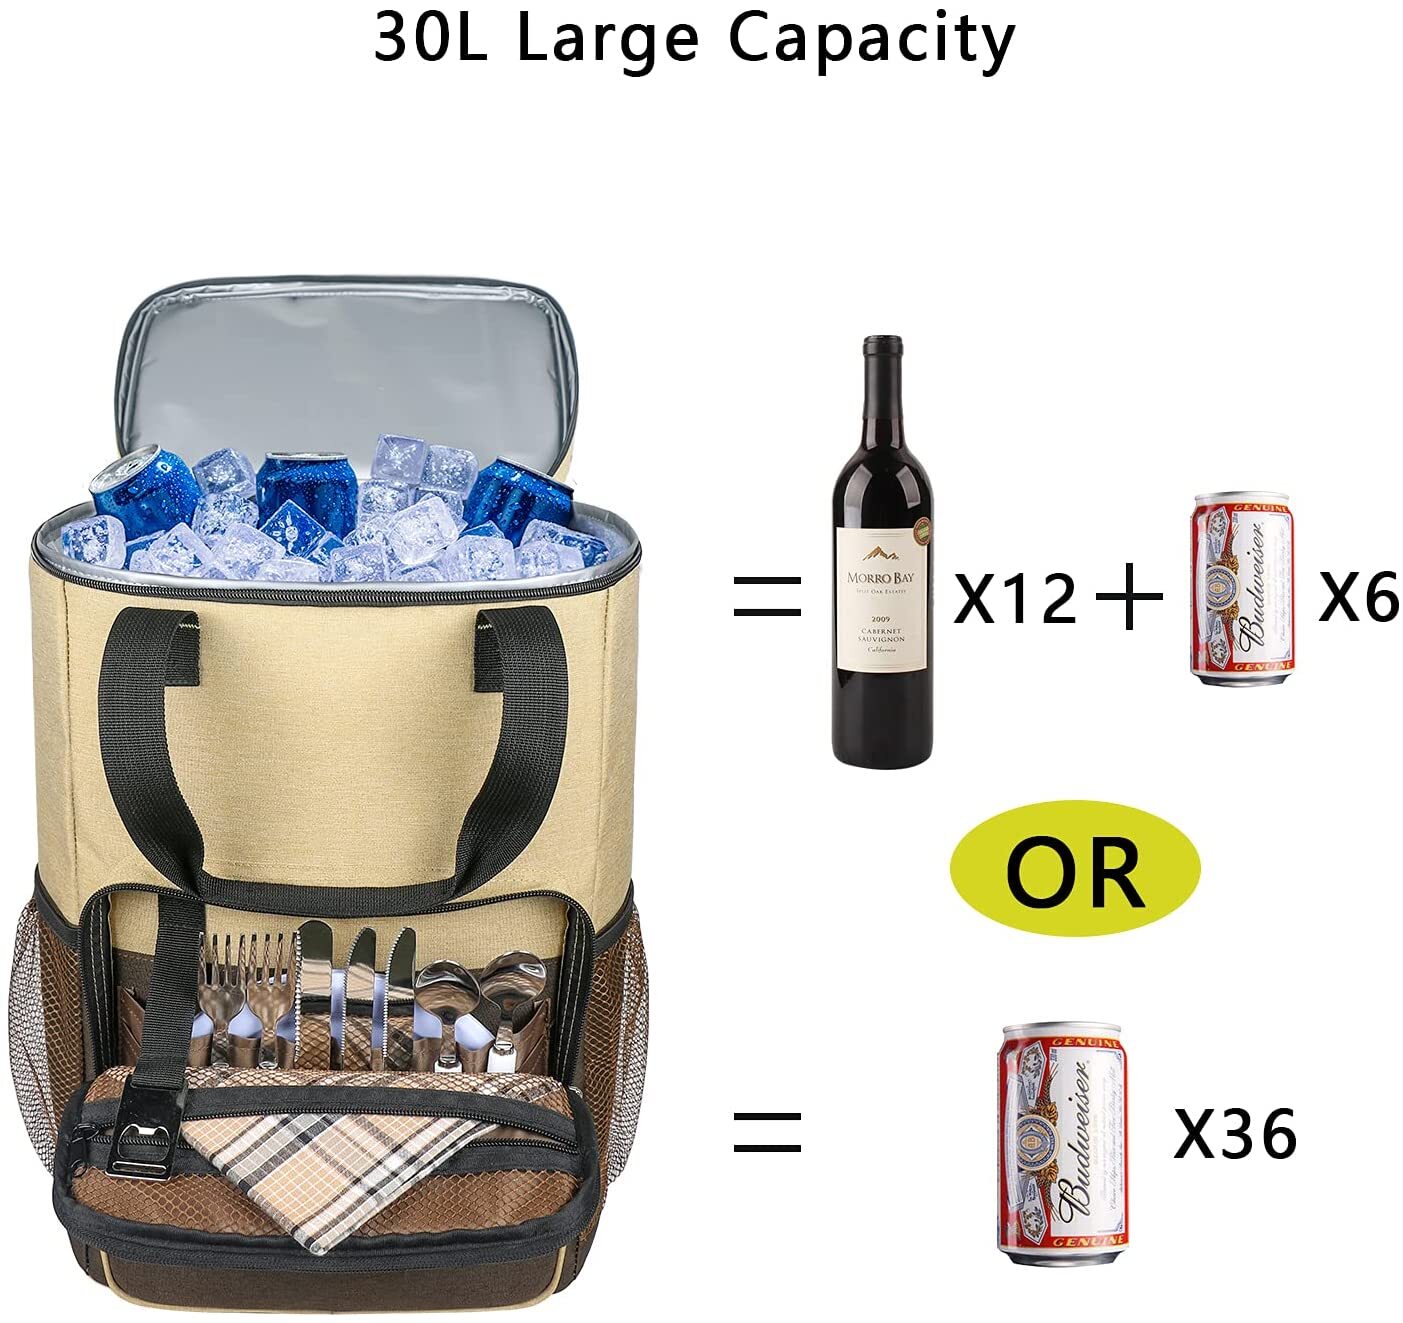 Hap Tim Picnic Backpack Cooler for 4 Person with Insulated Leakproof Cooler  Bag, Wine Holder, Fleece…See more Hap Tim Picnic Backpack Cooler for 4